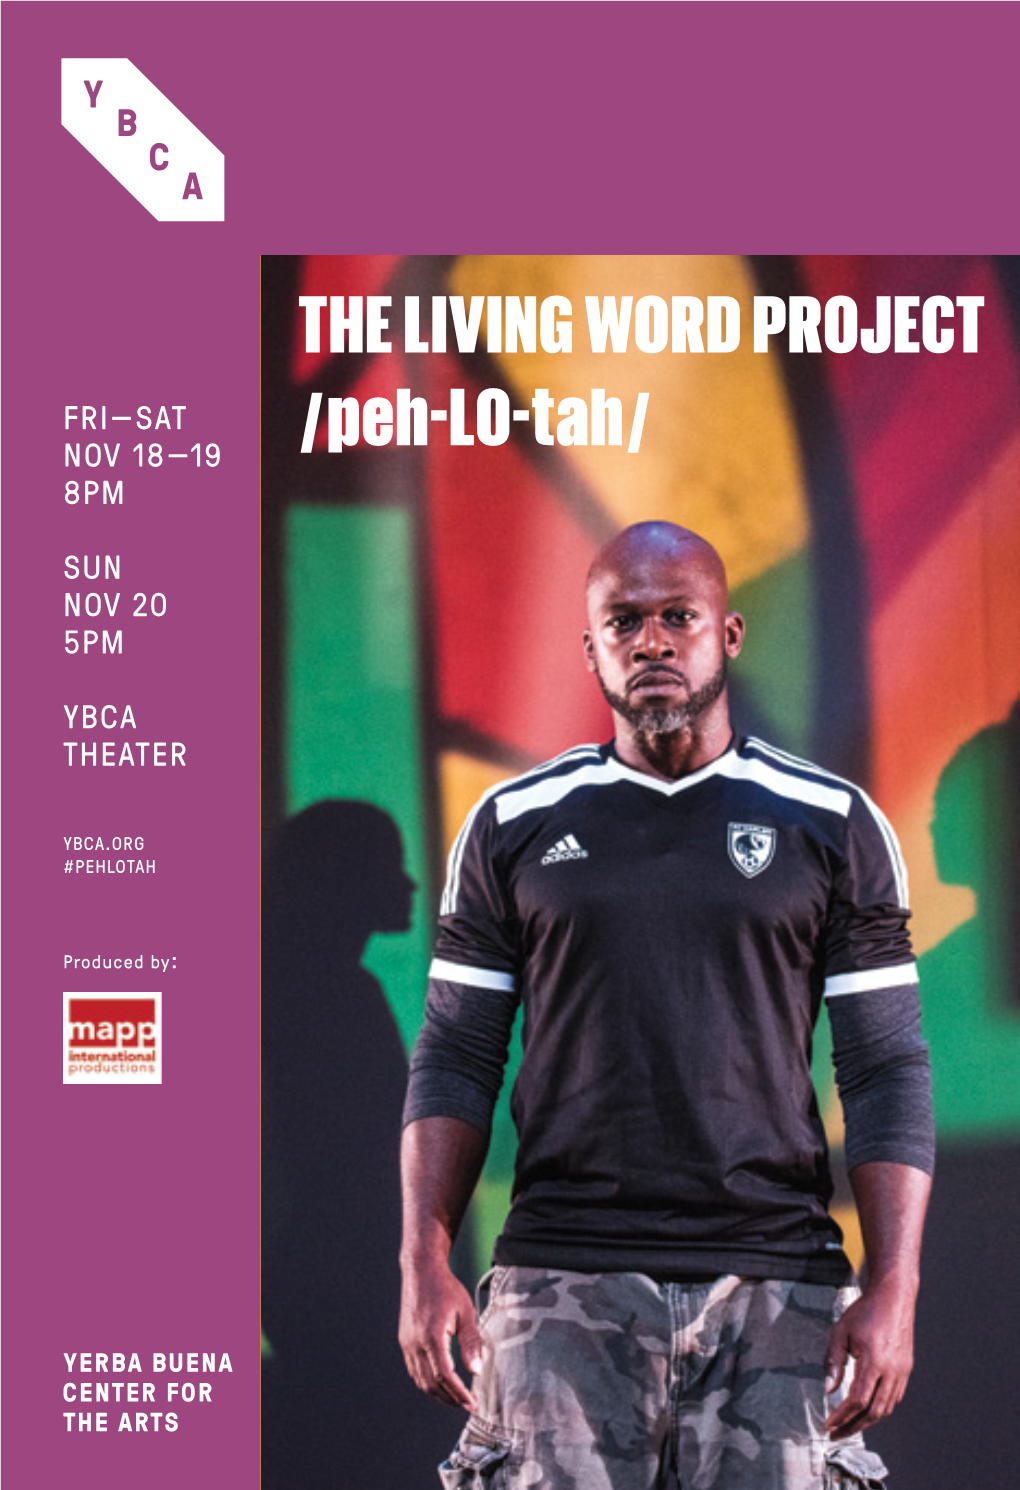 The Living Word Project